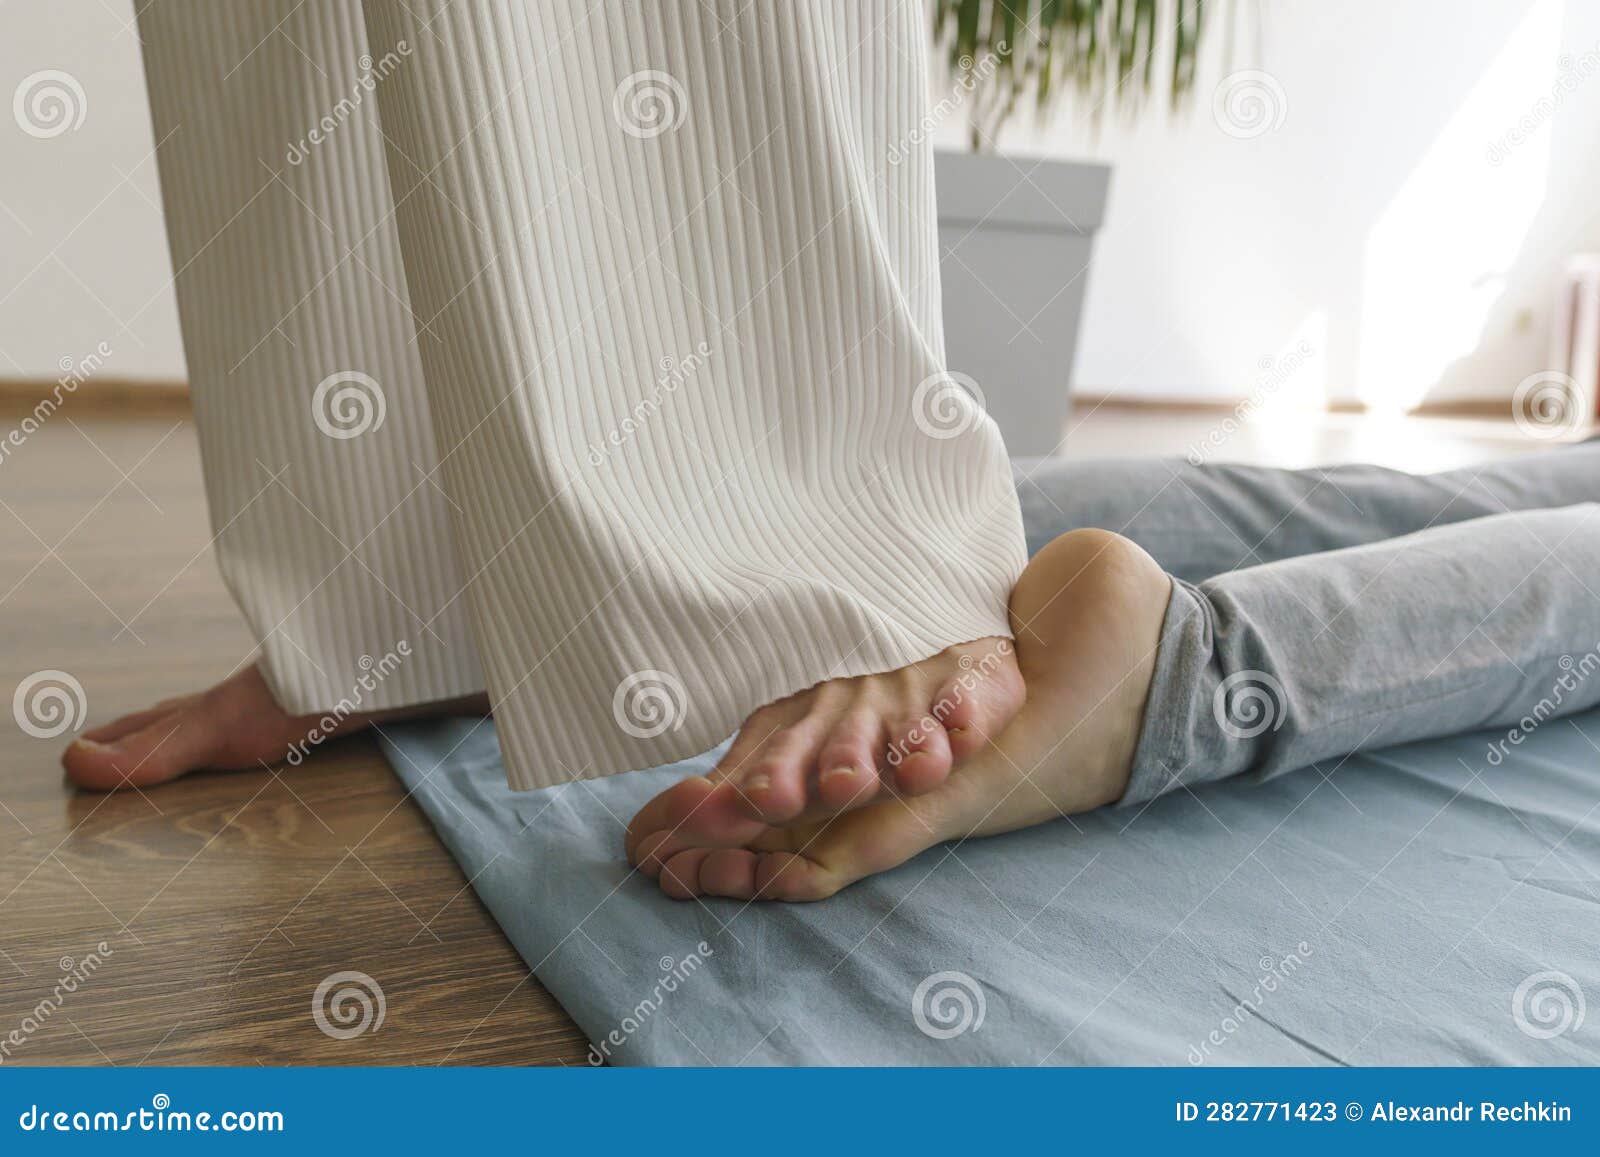 Young Masseuse Does A Thai Massage On The Floor To A Girl Massaging Her Feet Stock Image Image